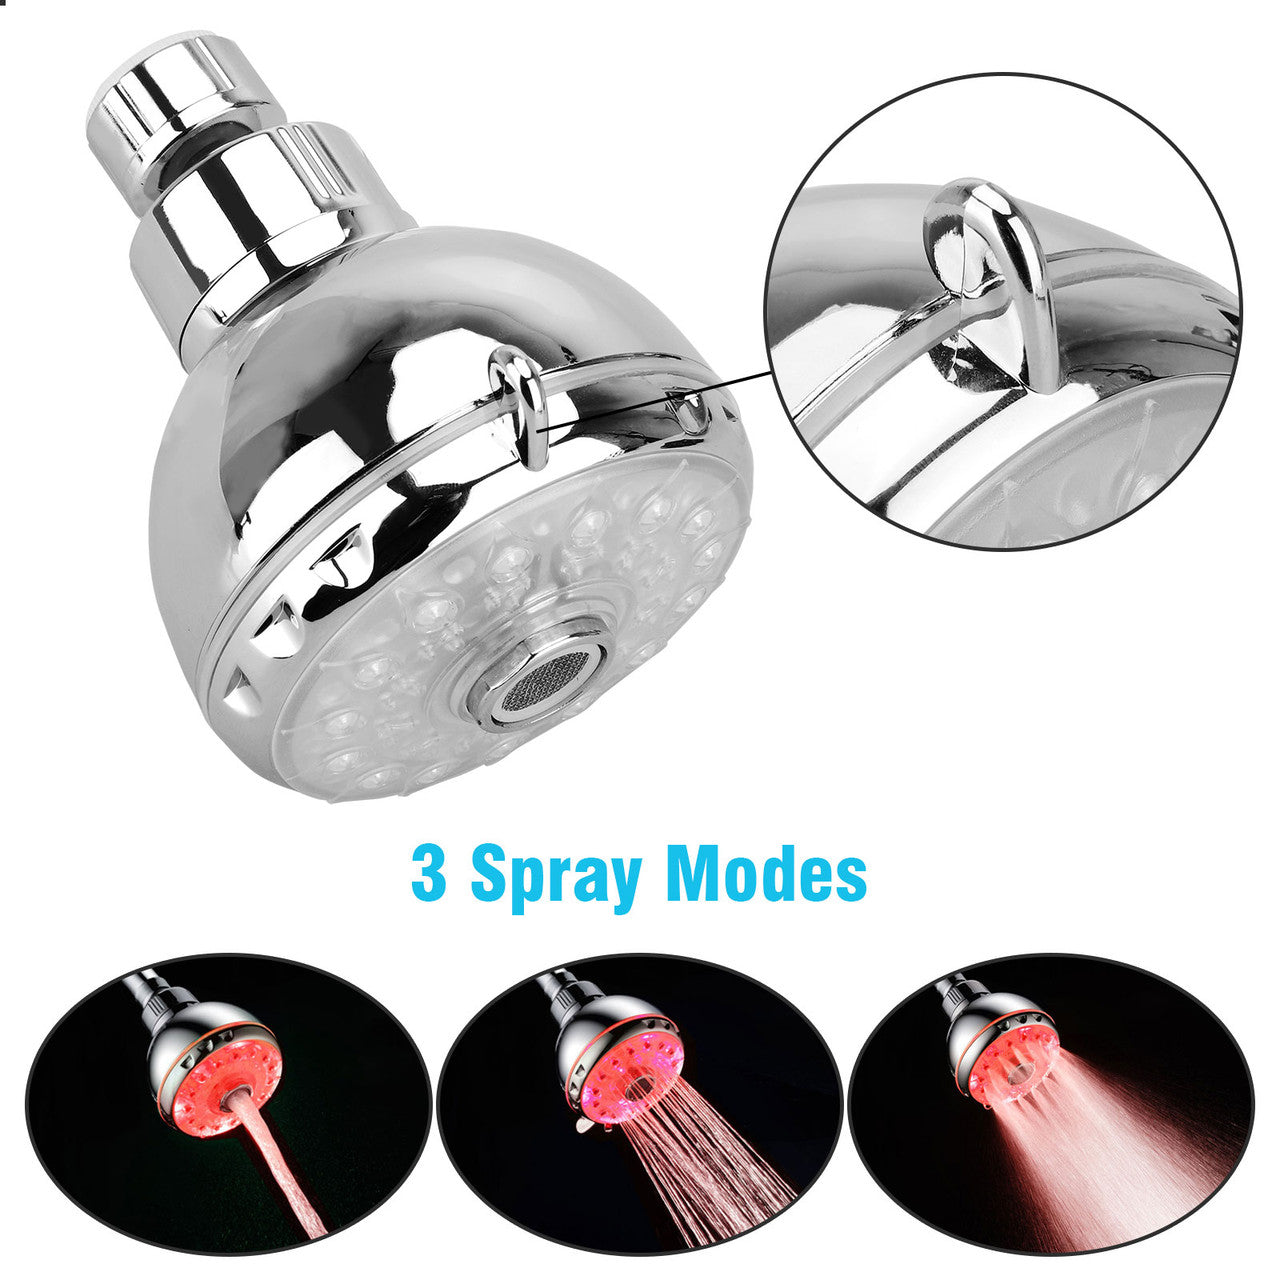 High Pressure LED Handheld Shower Head- Water Temperature Controlled Automatically Color Changing, 3 Spray Modes 360 Degree Rotatable-7 Colors LED Light Shower Head Replacement